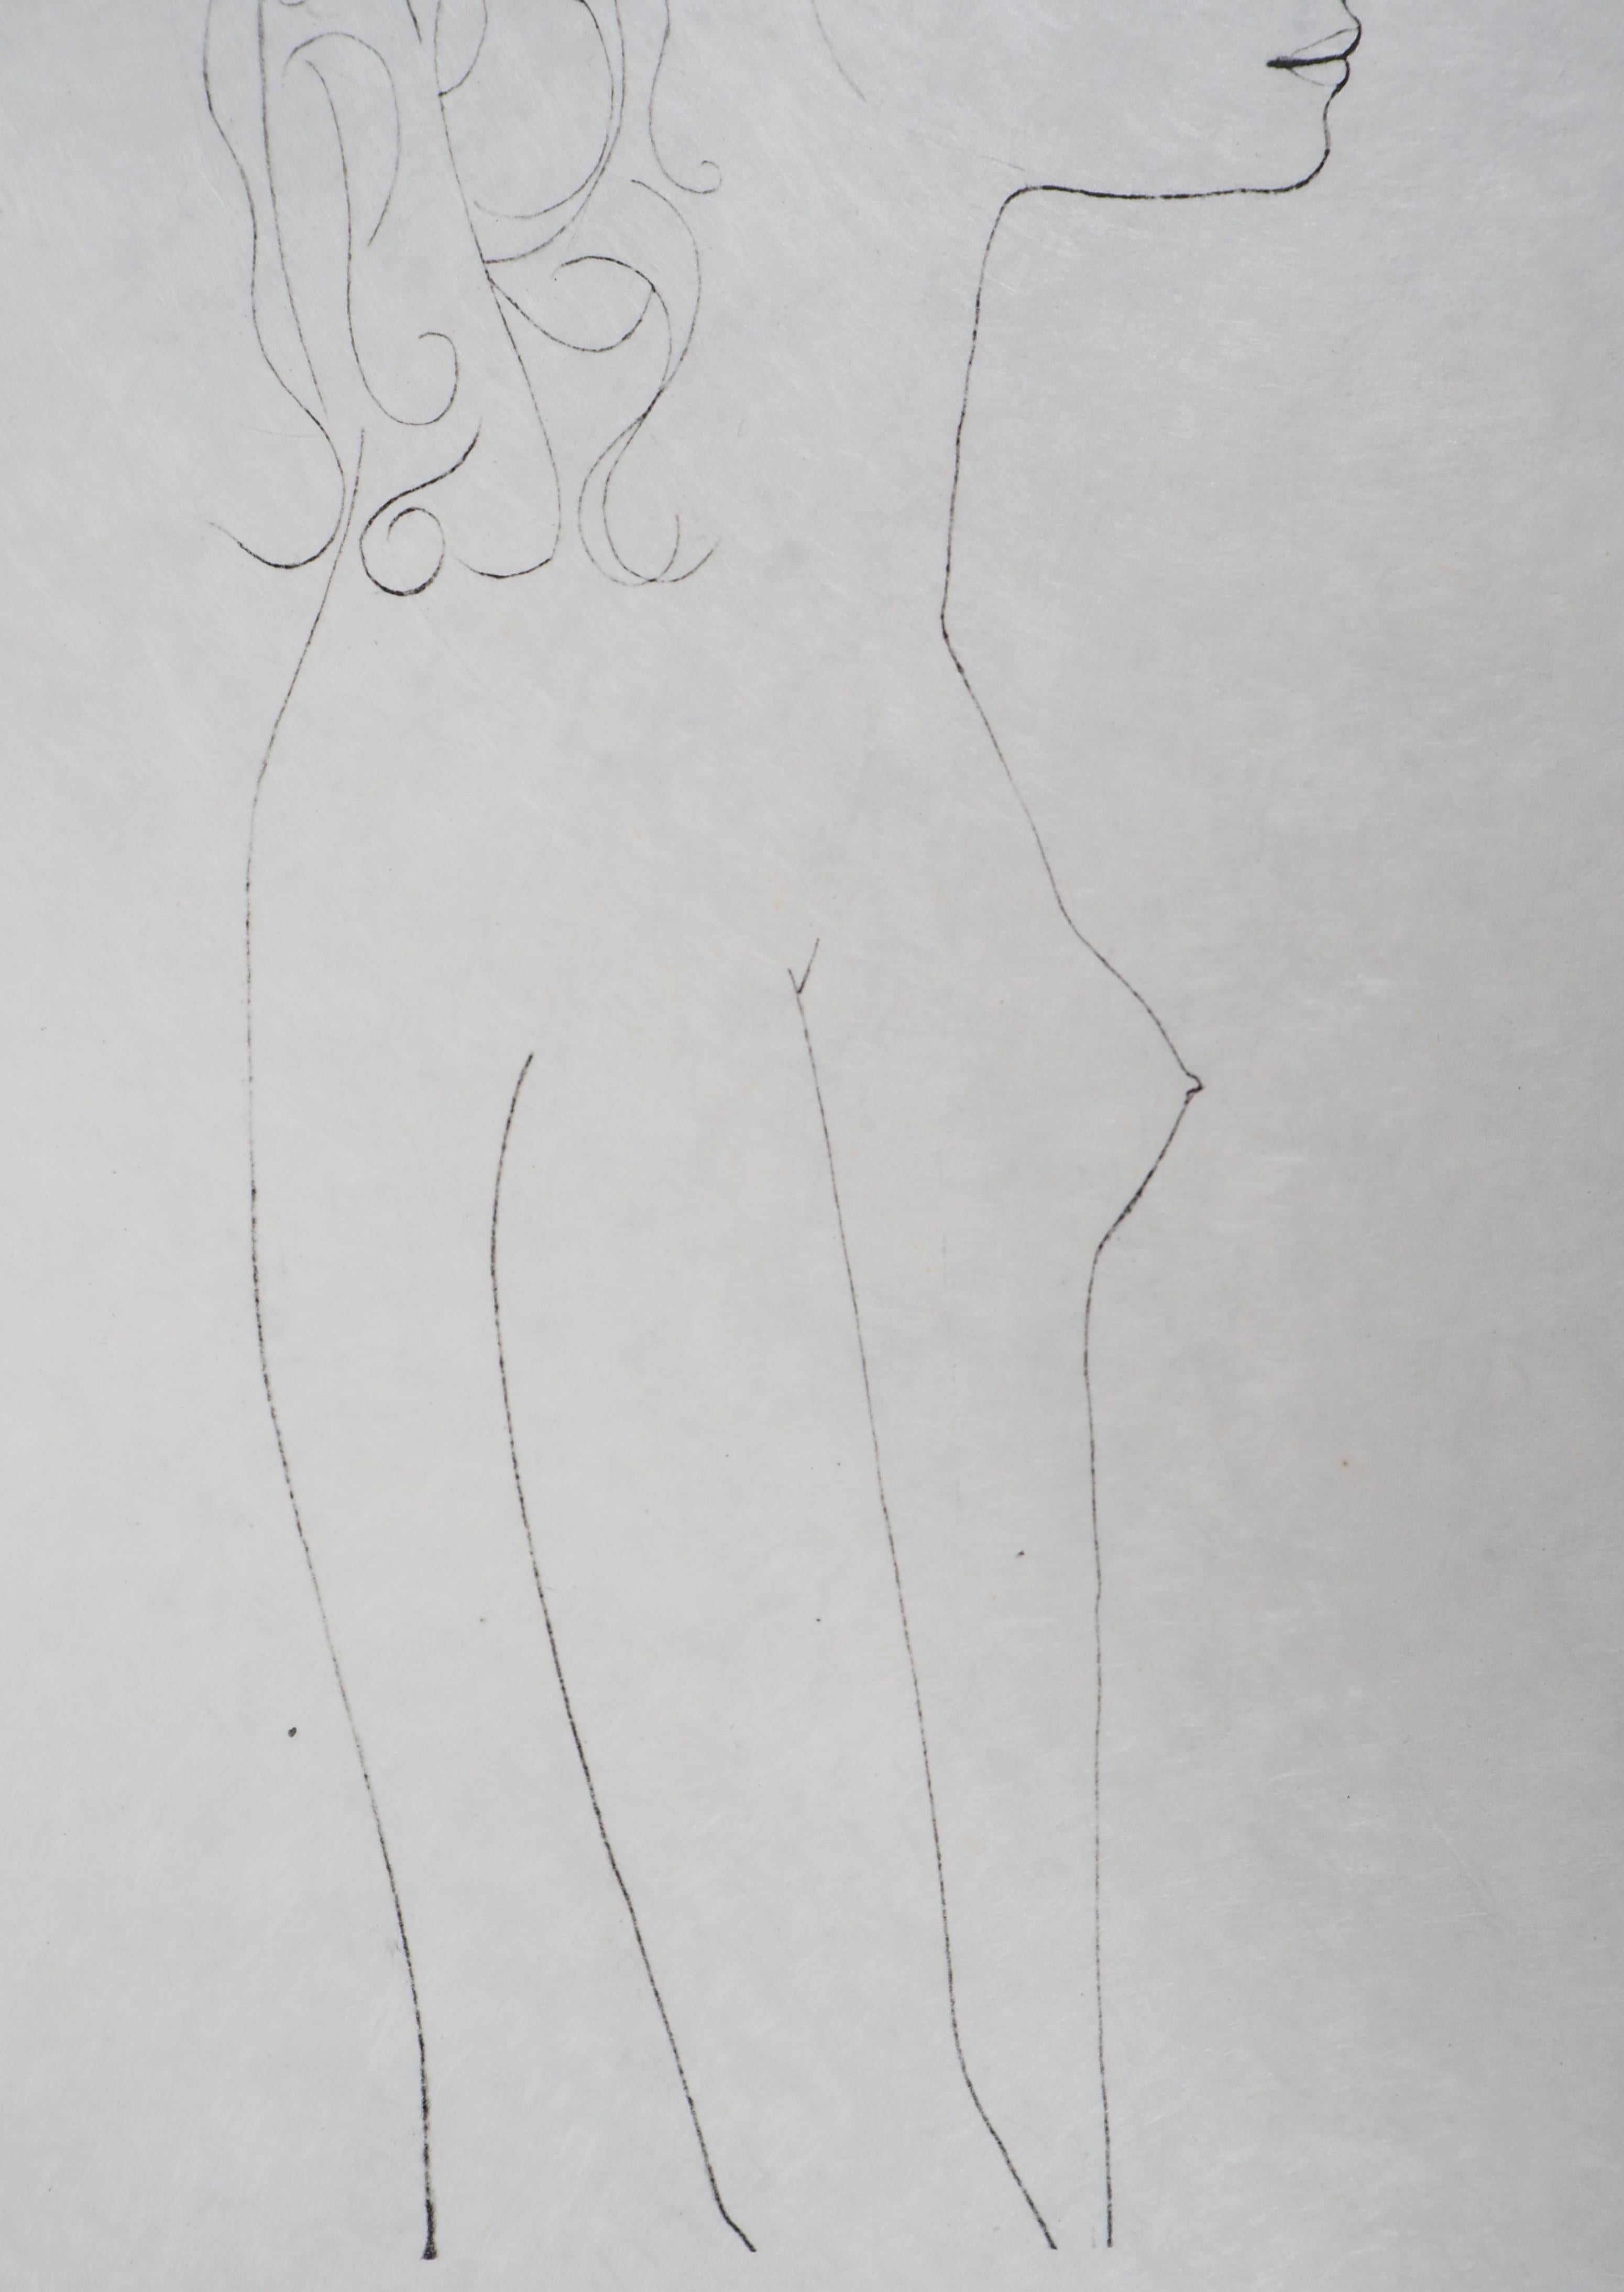 Profile of Genevieve - Lithograph on Japan paper - Limited to 100 proofs - Modern Print by (after) Pablo Picasso